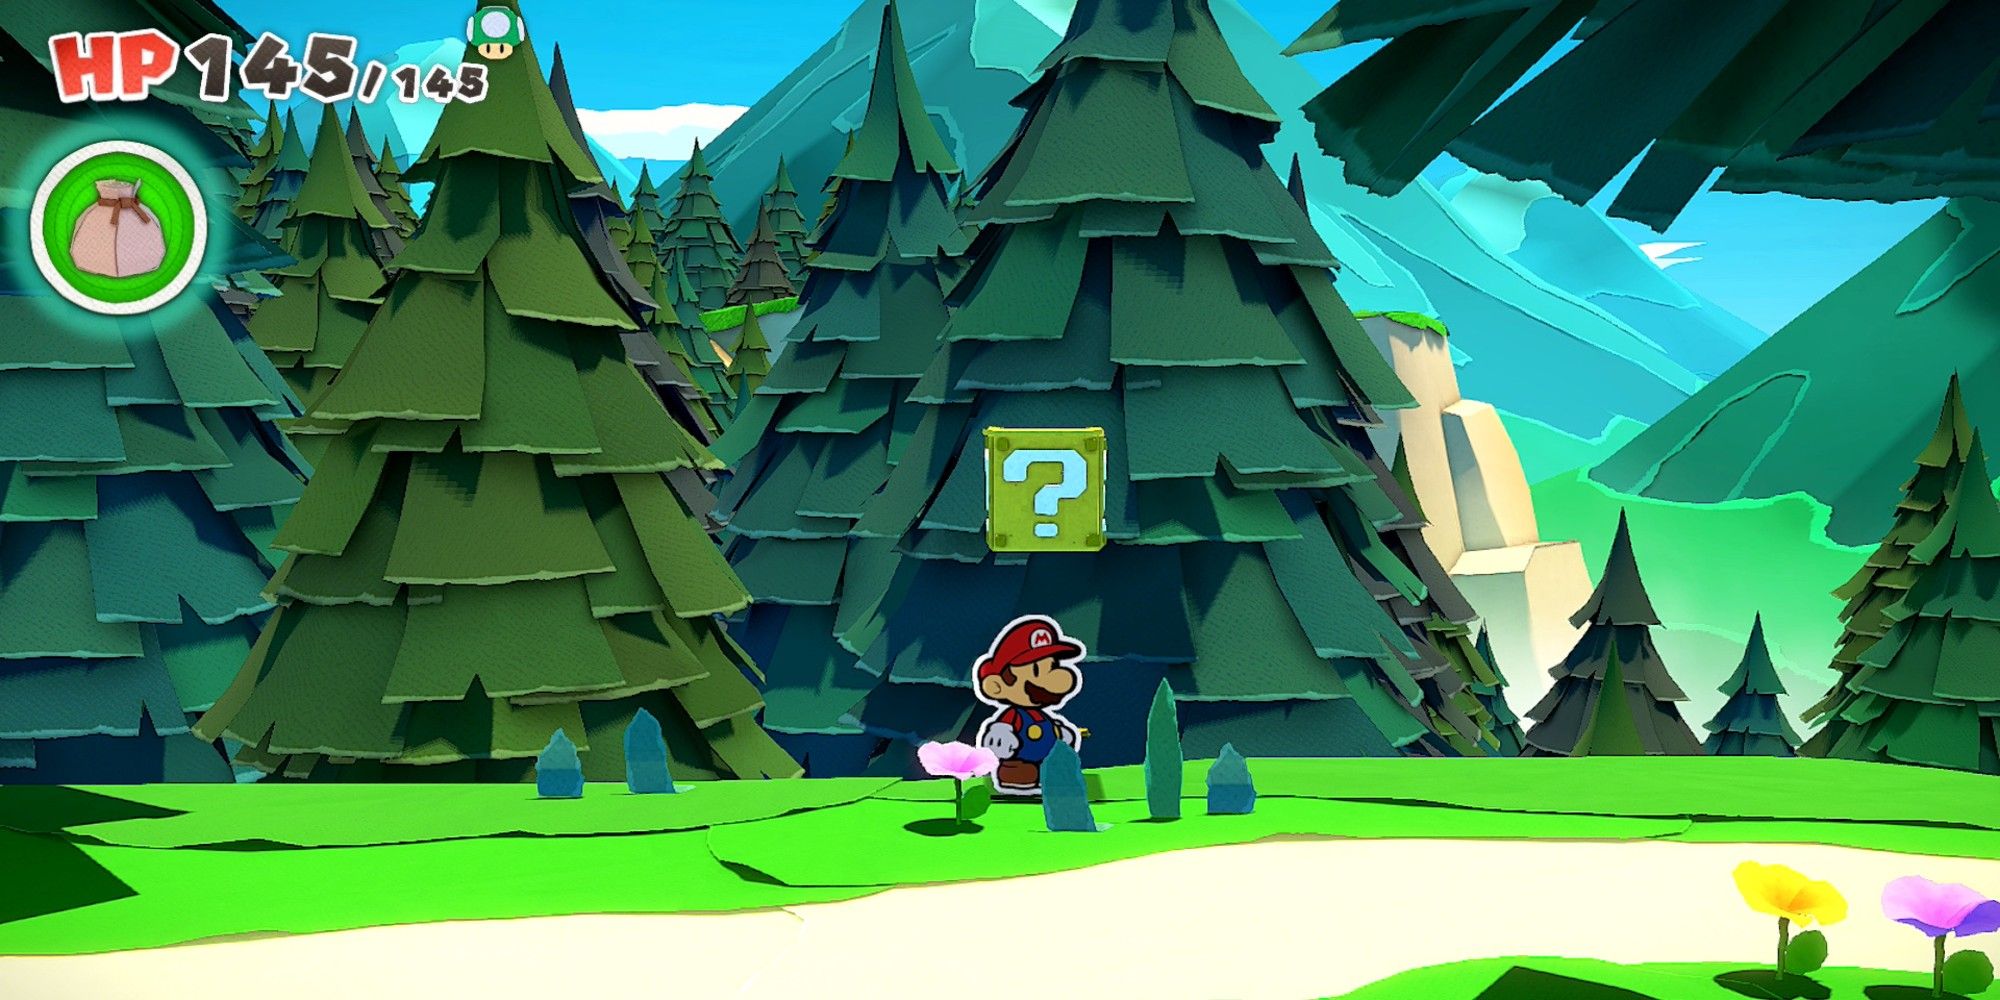 How To Get The Secret Ending in Paper Mario